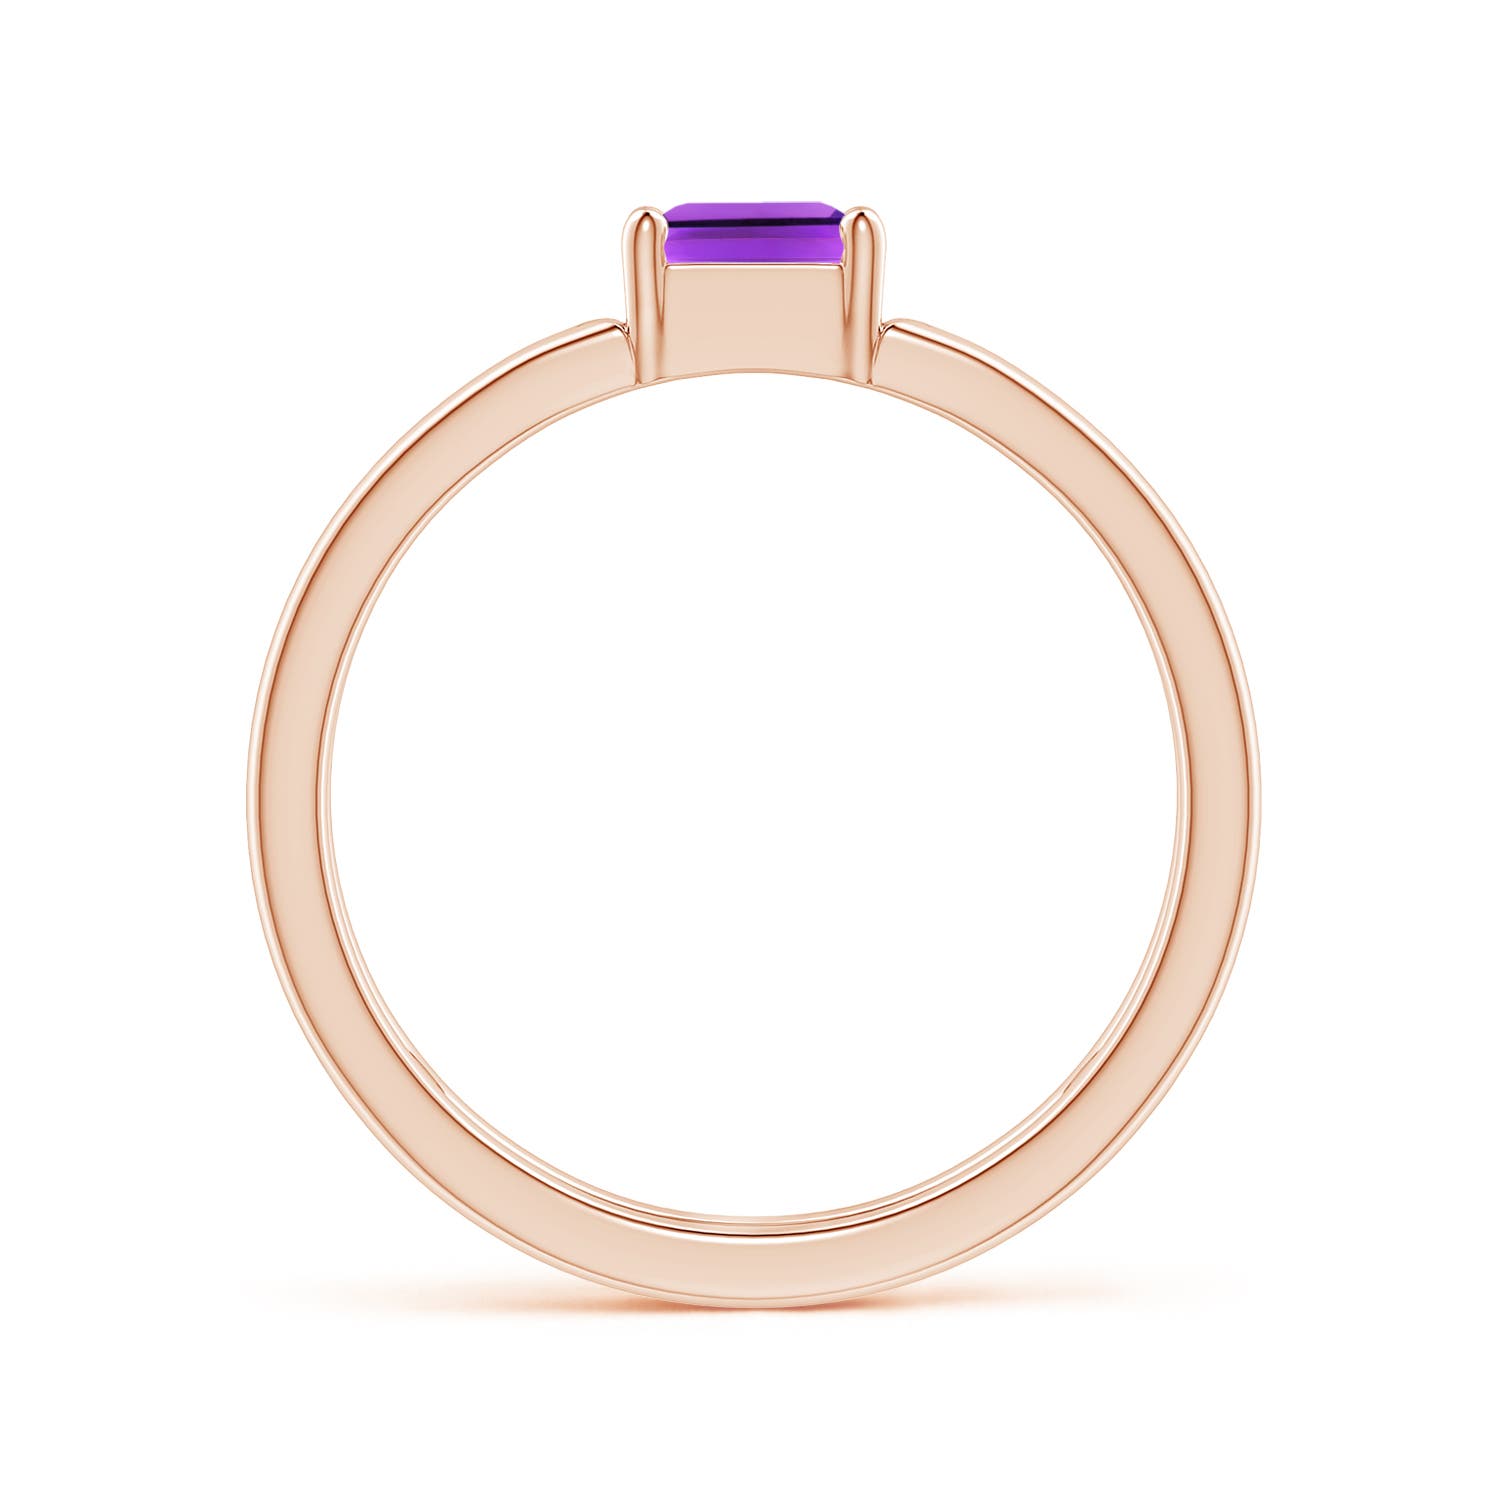 AAA - Amethyst / 0.7 CT / 14 KT Rose Gold